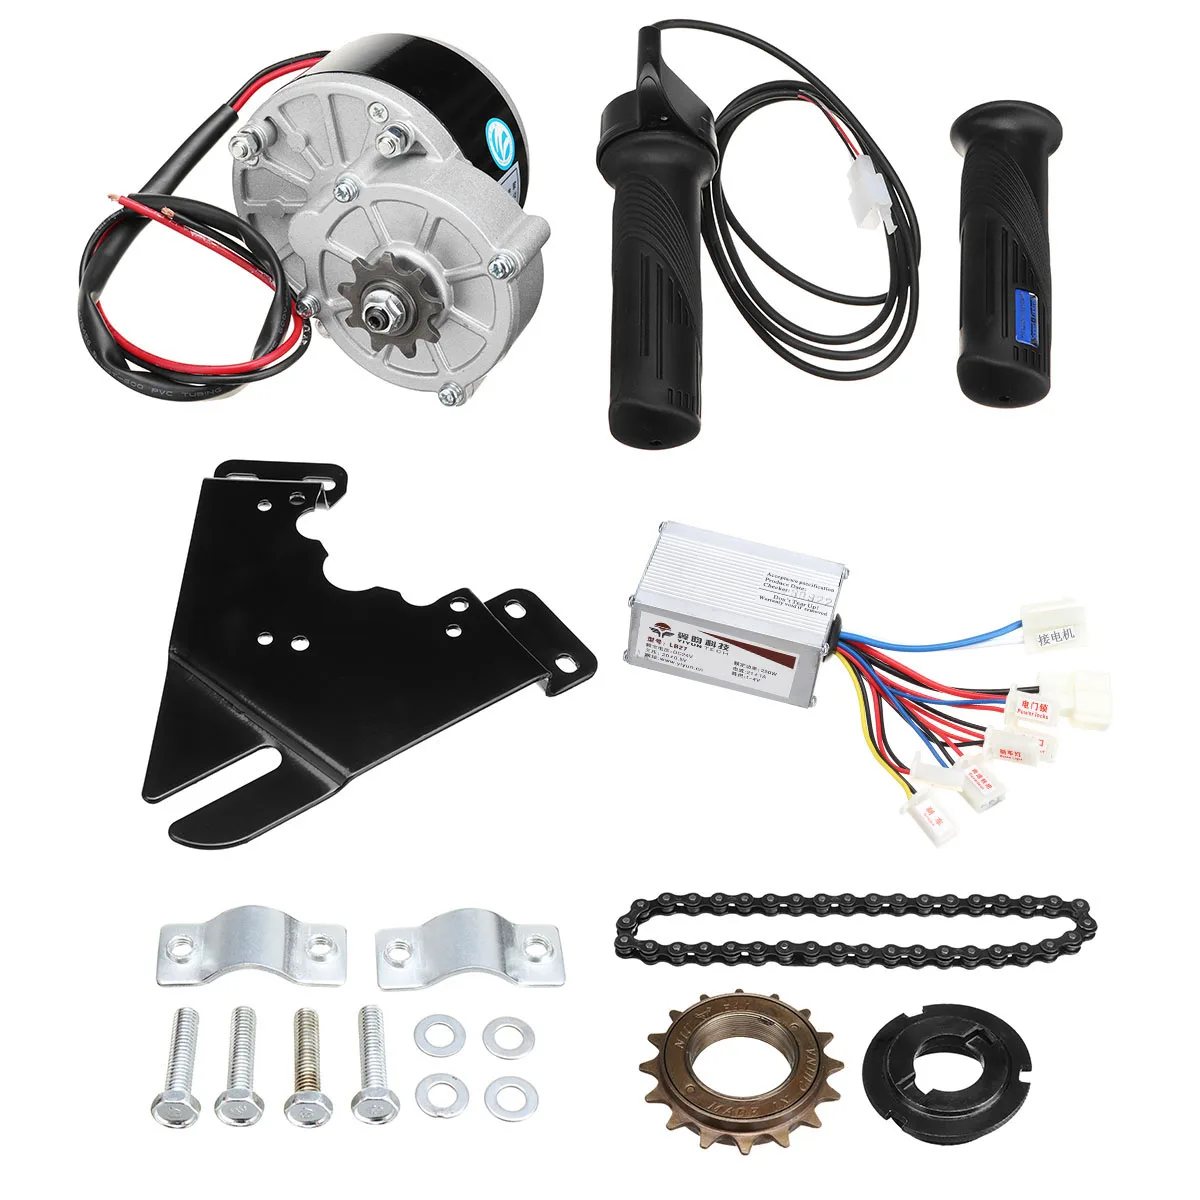 Perfect 24V 250W Electric Scooter Motor Conversion Kit Brushed Motor Controller Set For 20-28" Electric Bike Skatebord Bicycle Kit 1